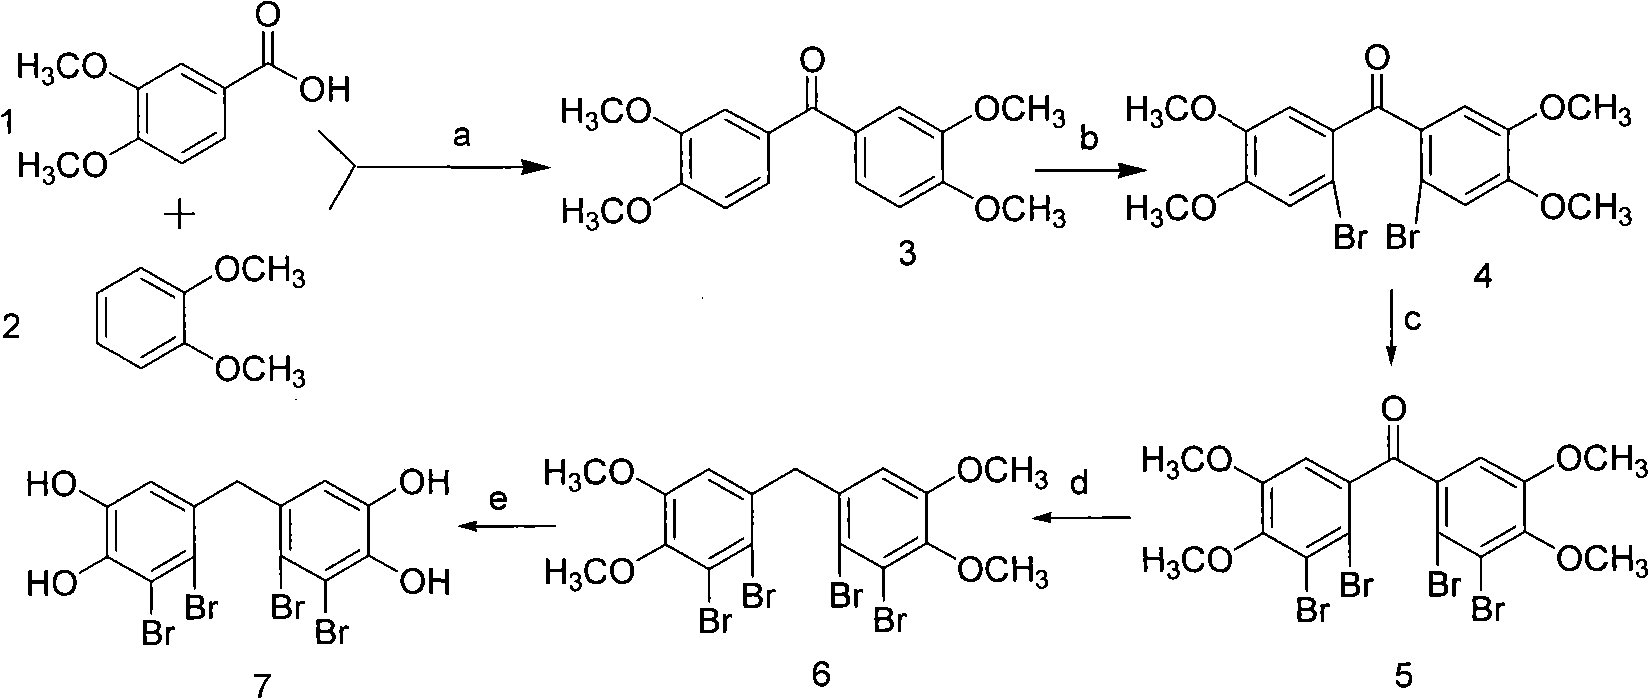 Chemical synthesis method of bromphenol PTP1B inhibitor